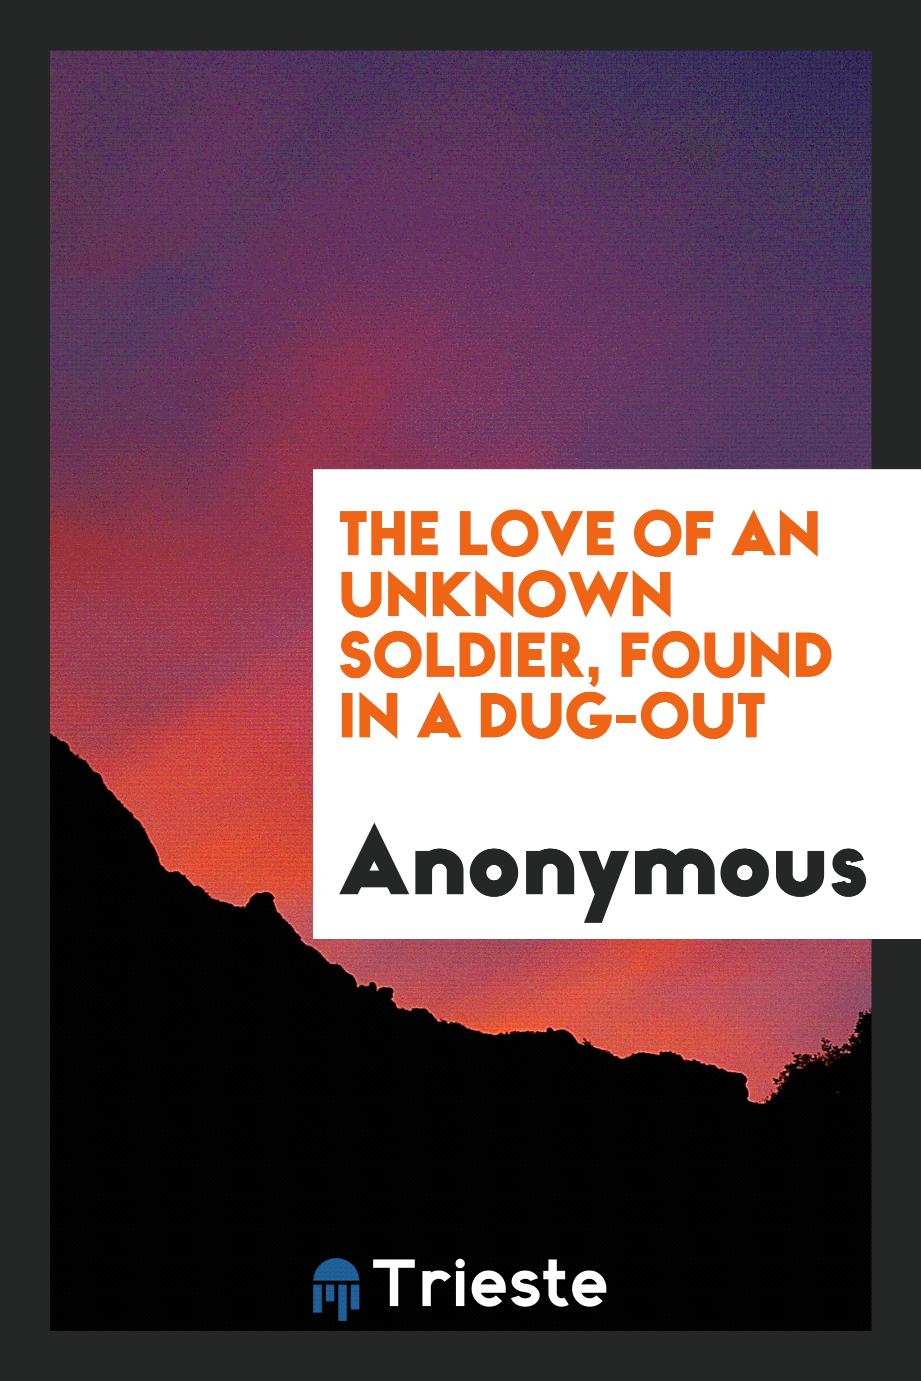 The love of an unknown soldier, found in a dug-out